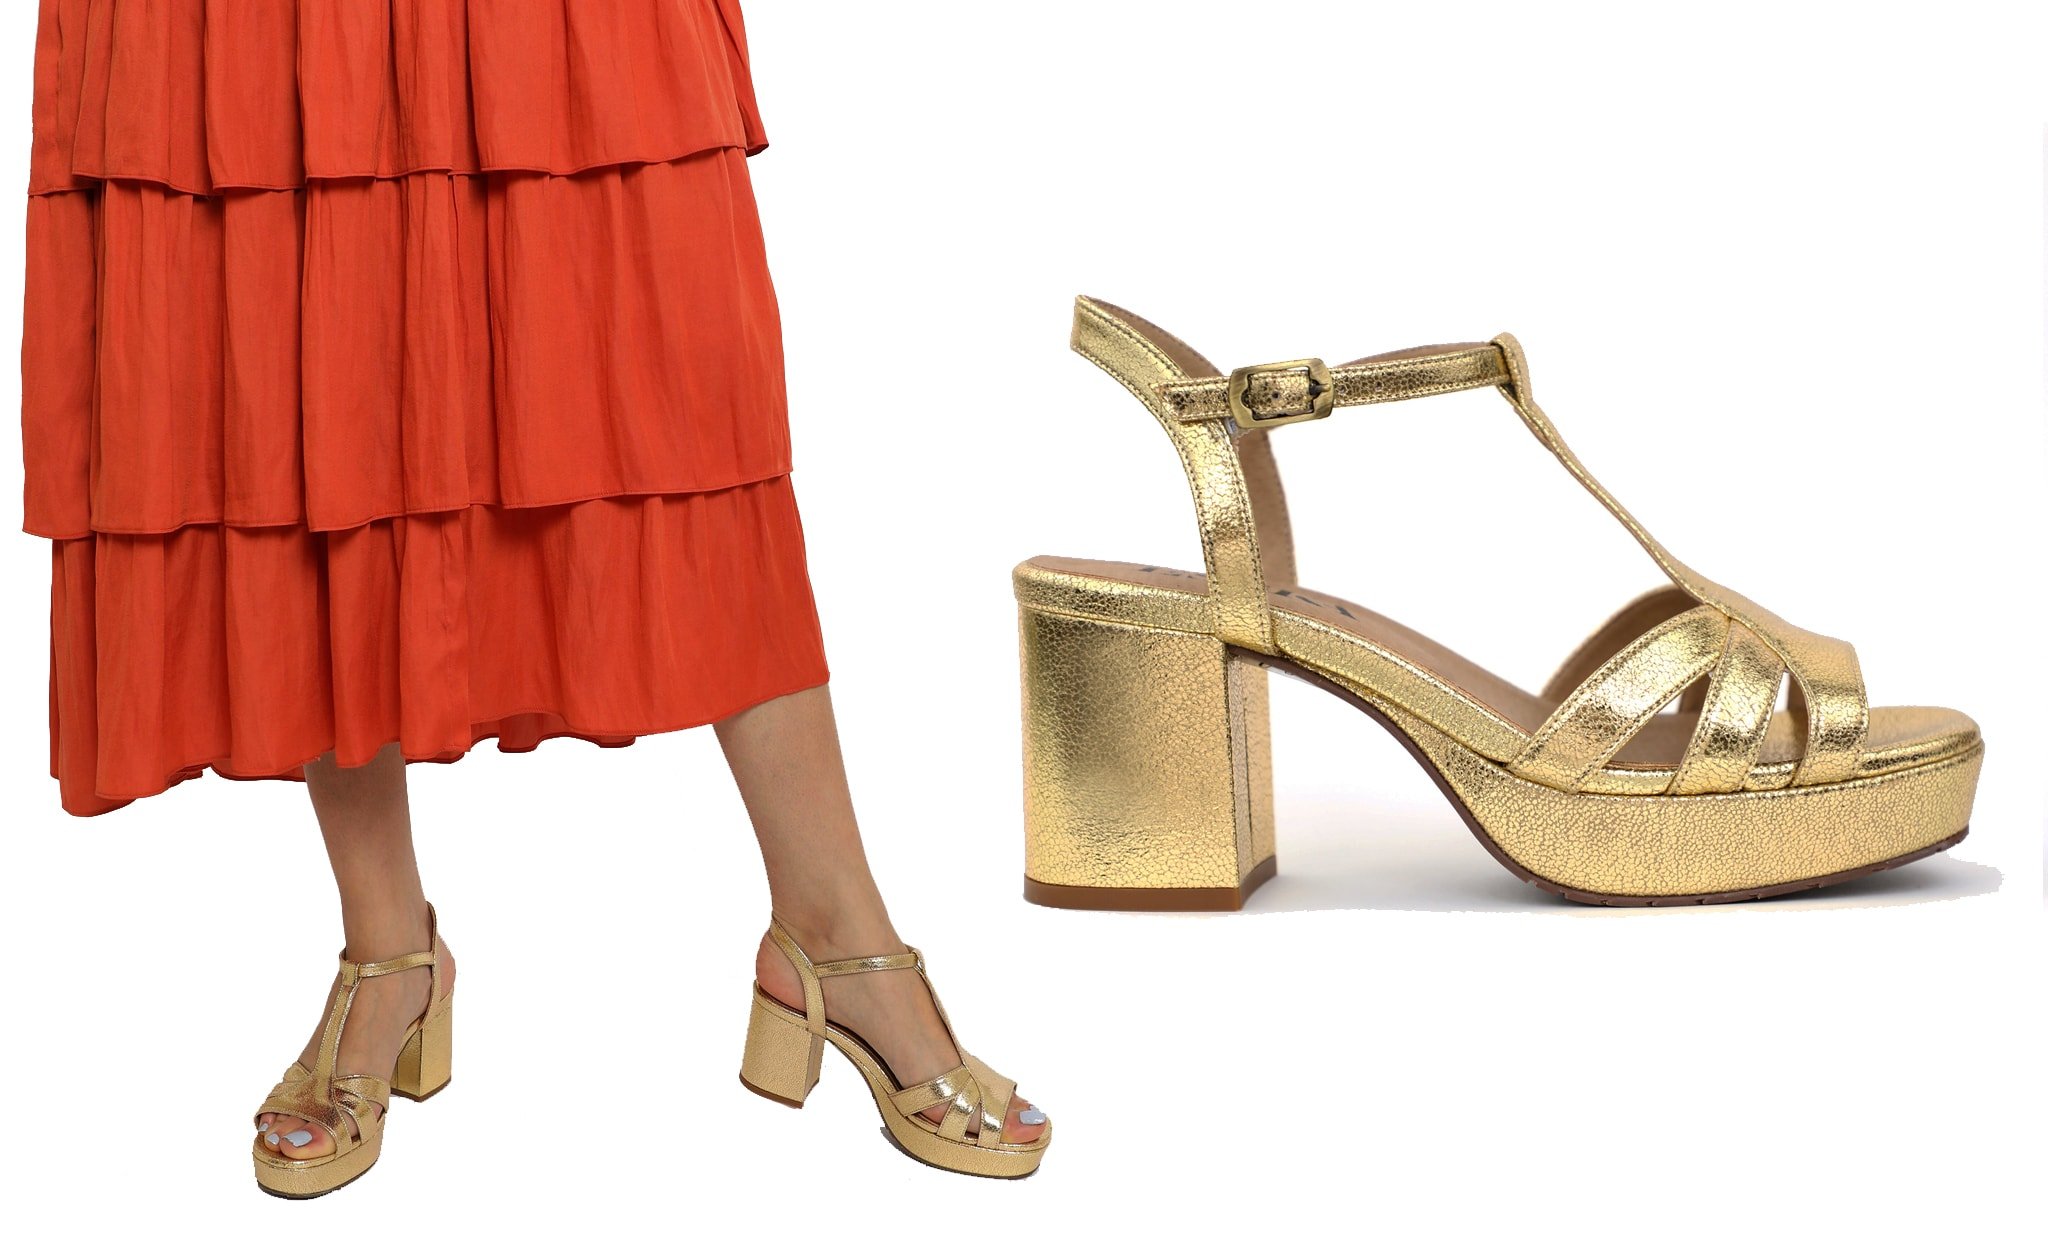 Giving a nod to the '70s, Esska's Charlie gold sandals feature a T-bar design, 3-inch block heel, and 1-inch platform